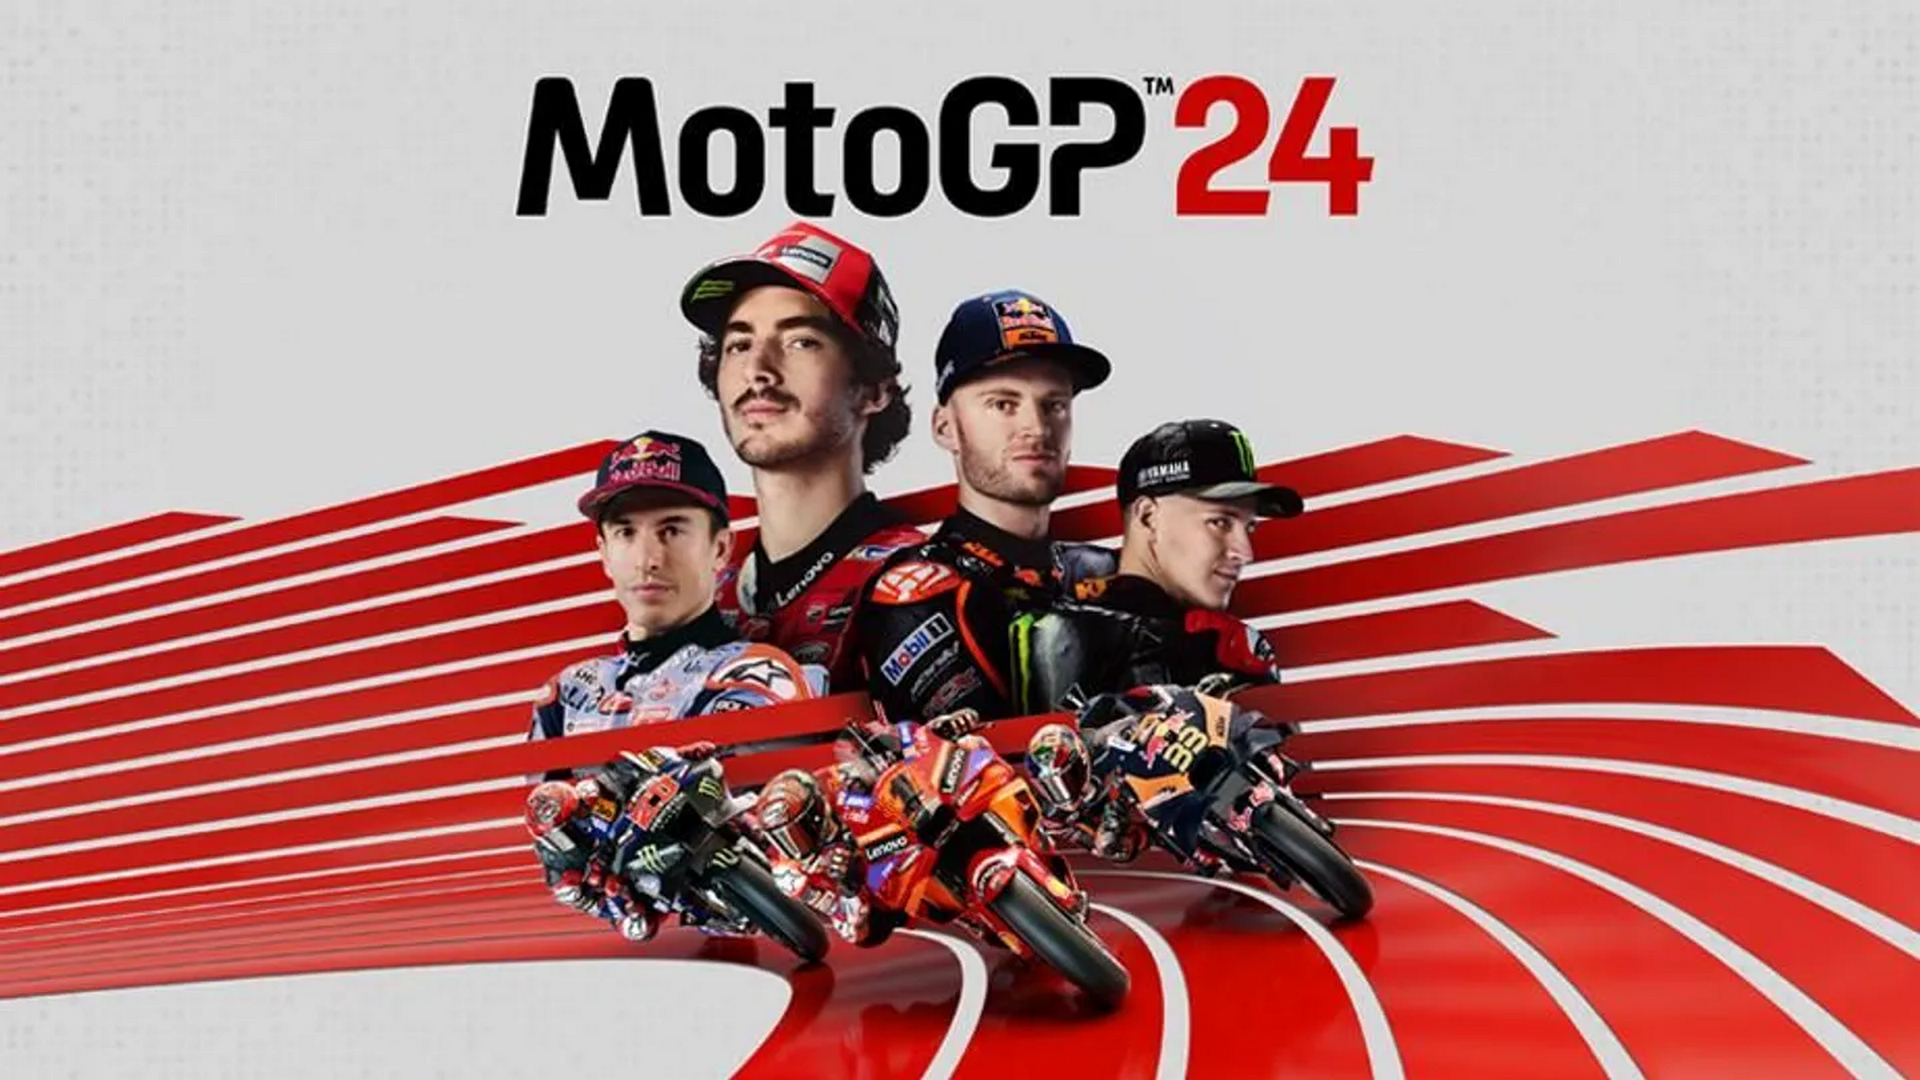 MotoGP 24 Will Feature The Riders Market For The First Time In The History Of The Franchise